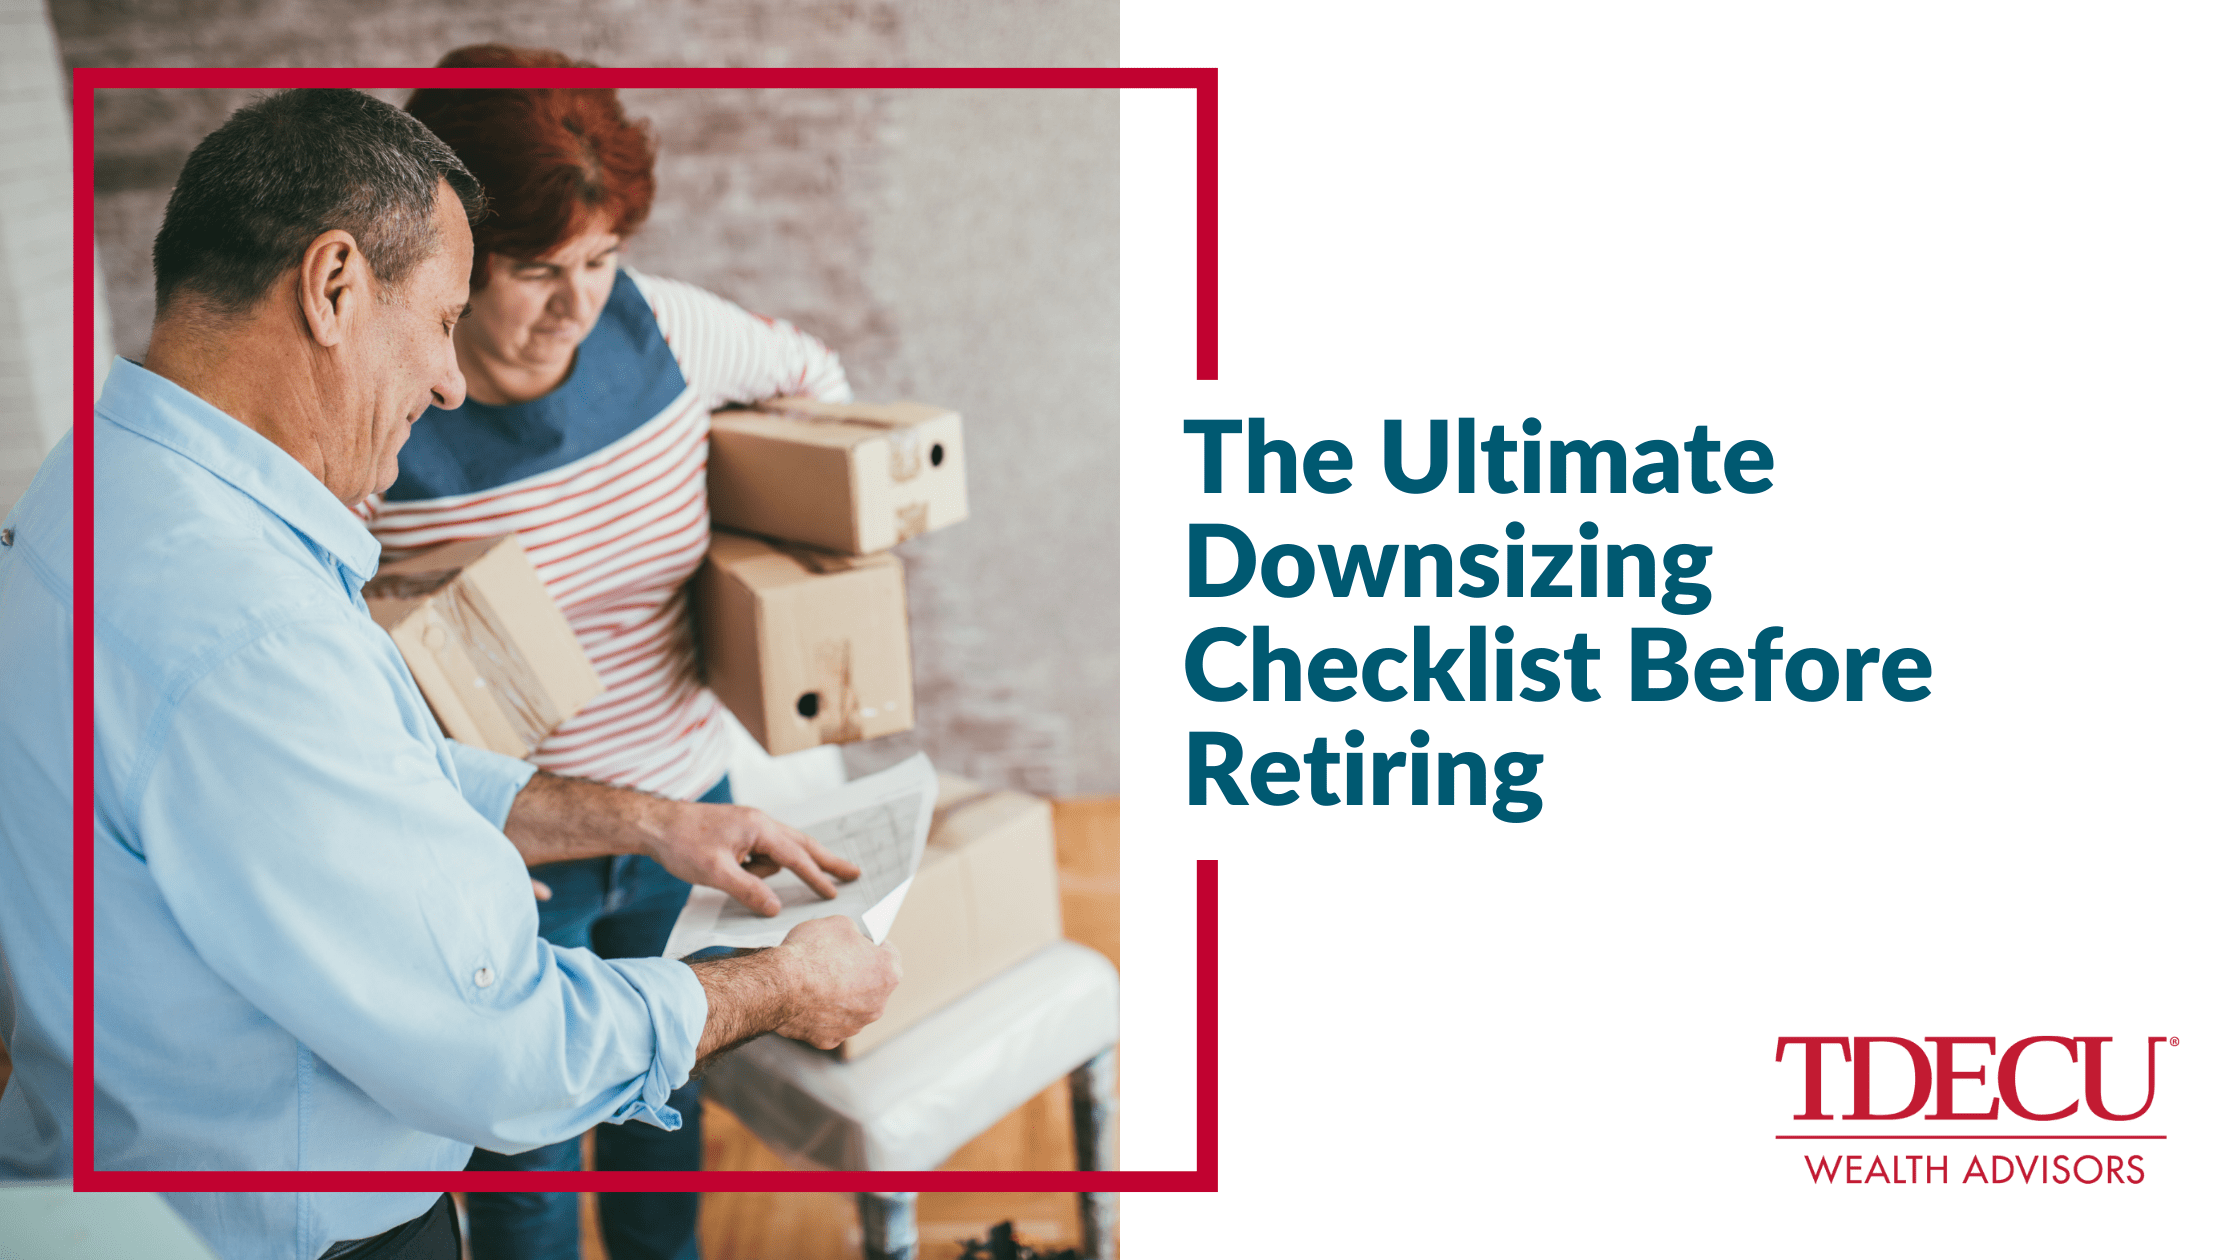 The Ultimate Downsizing Checklist Before Retiring